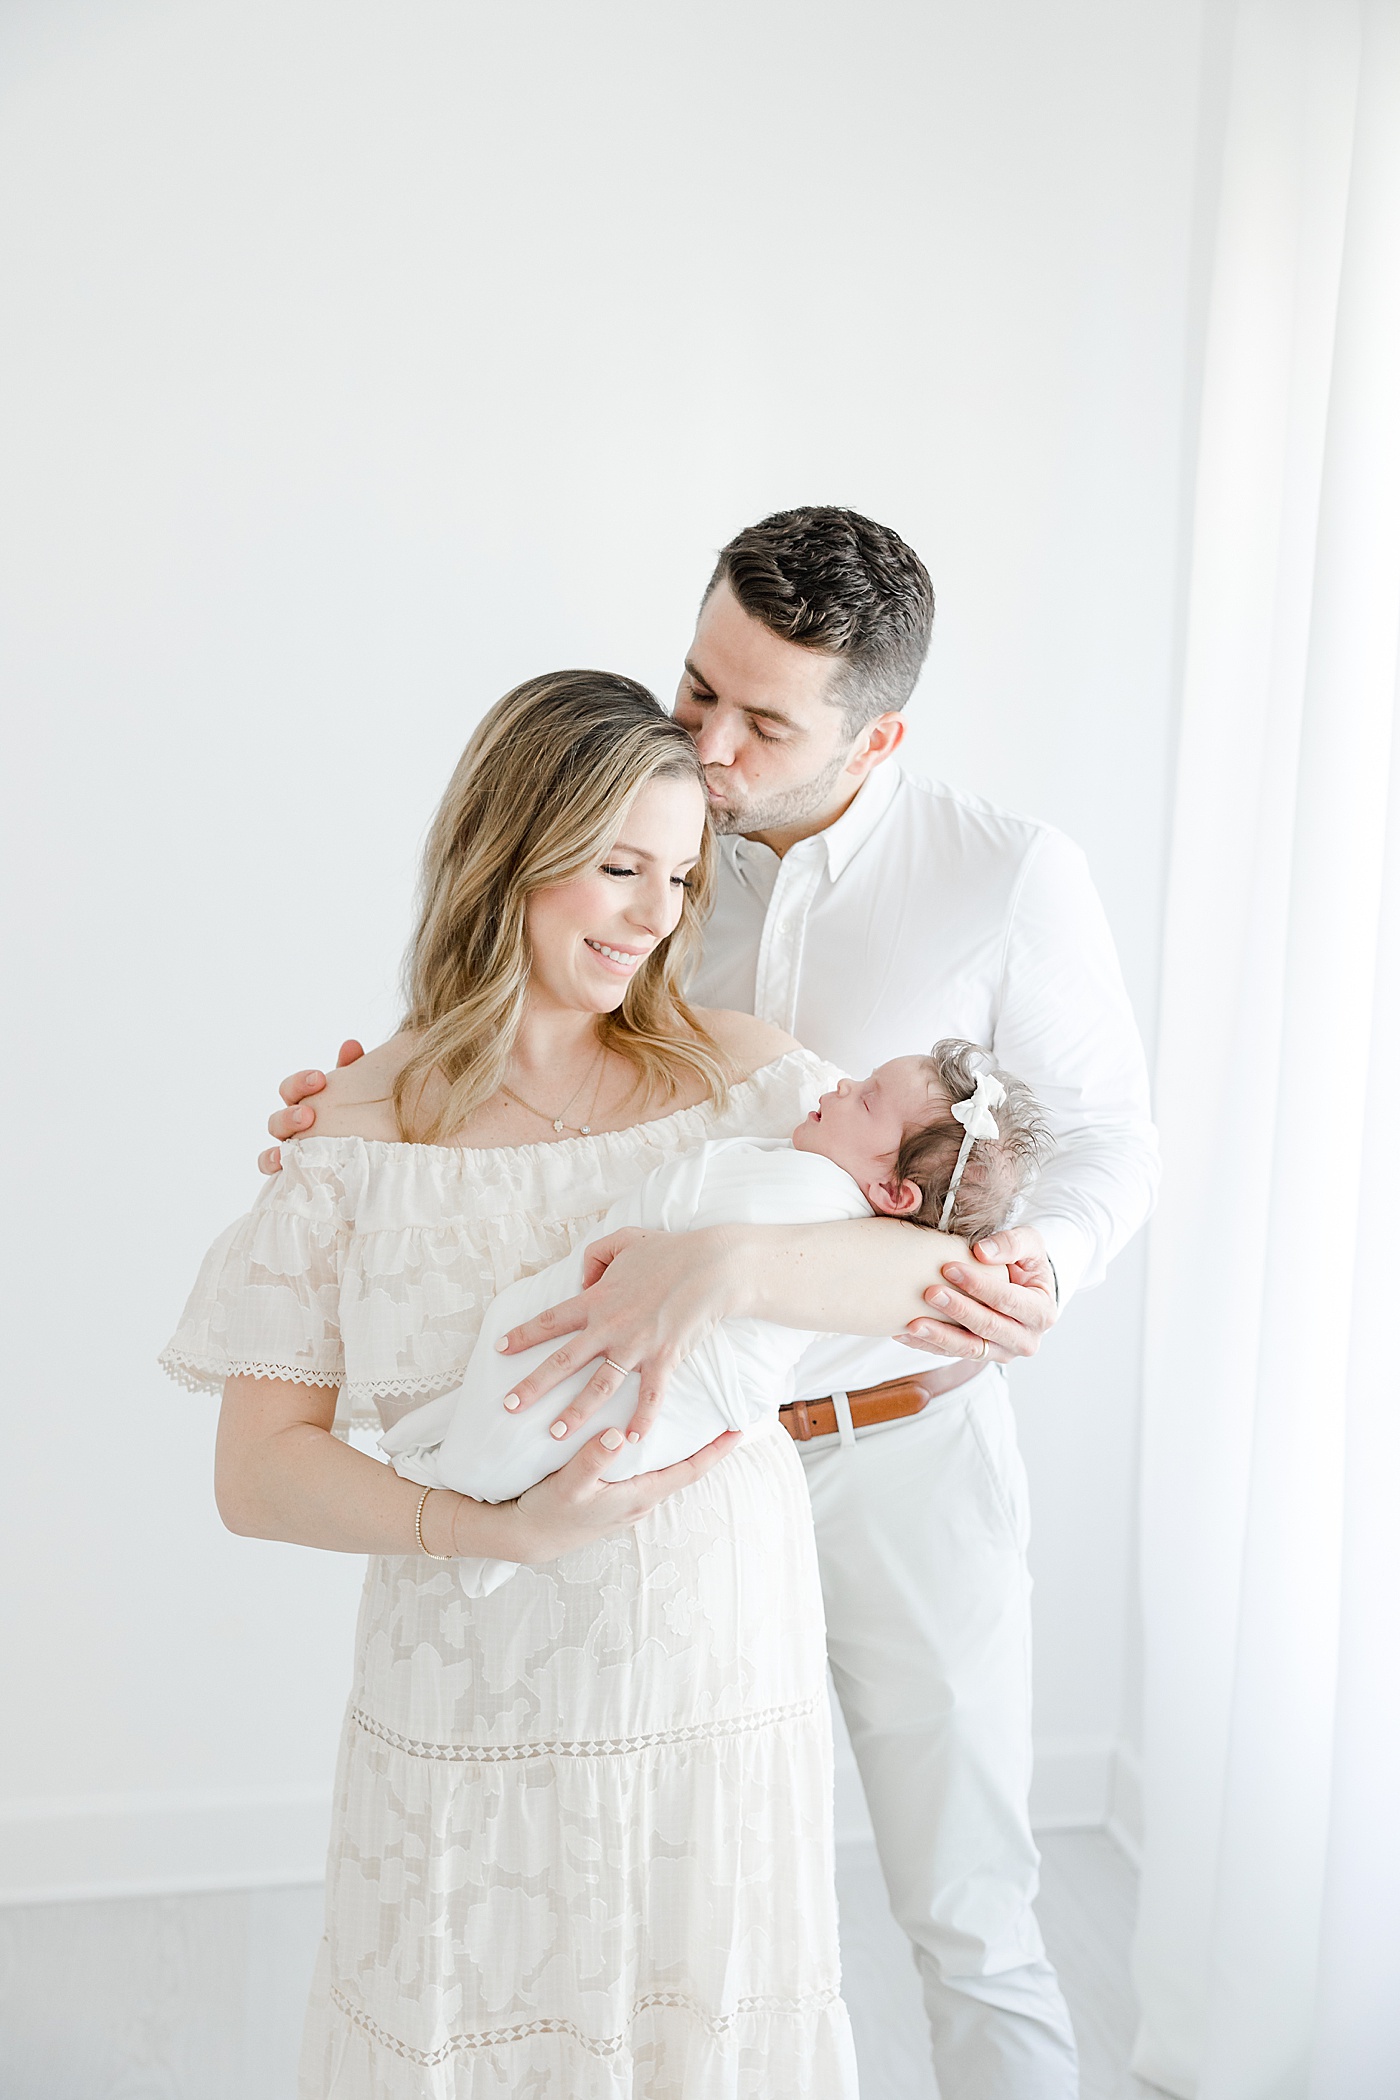 New parents with baby girl | Kristin Wood Photography